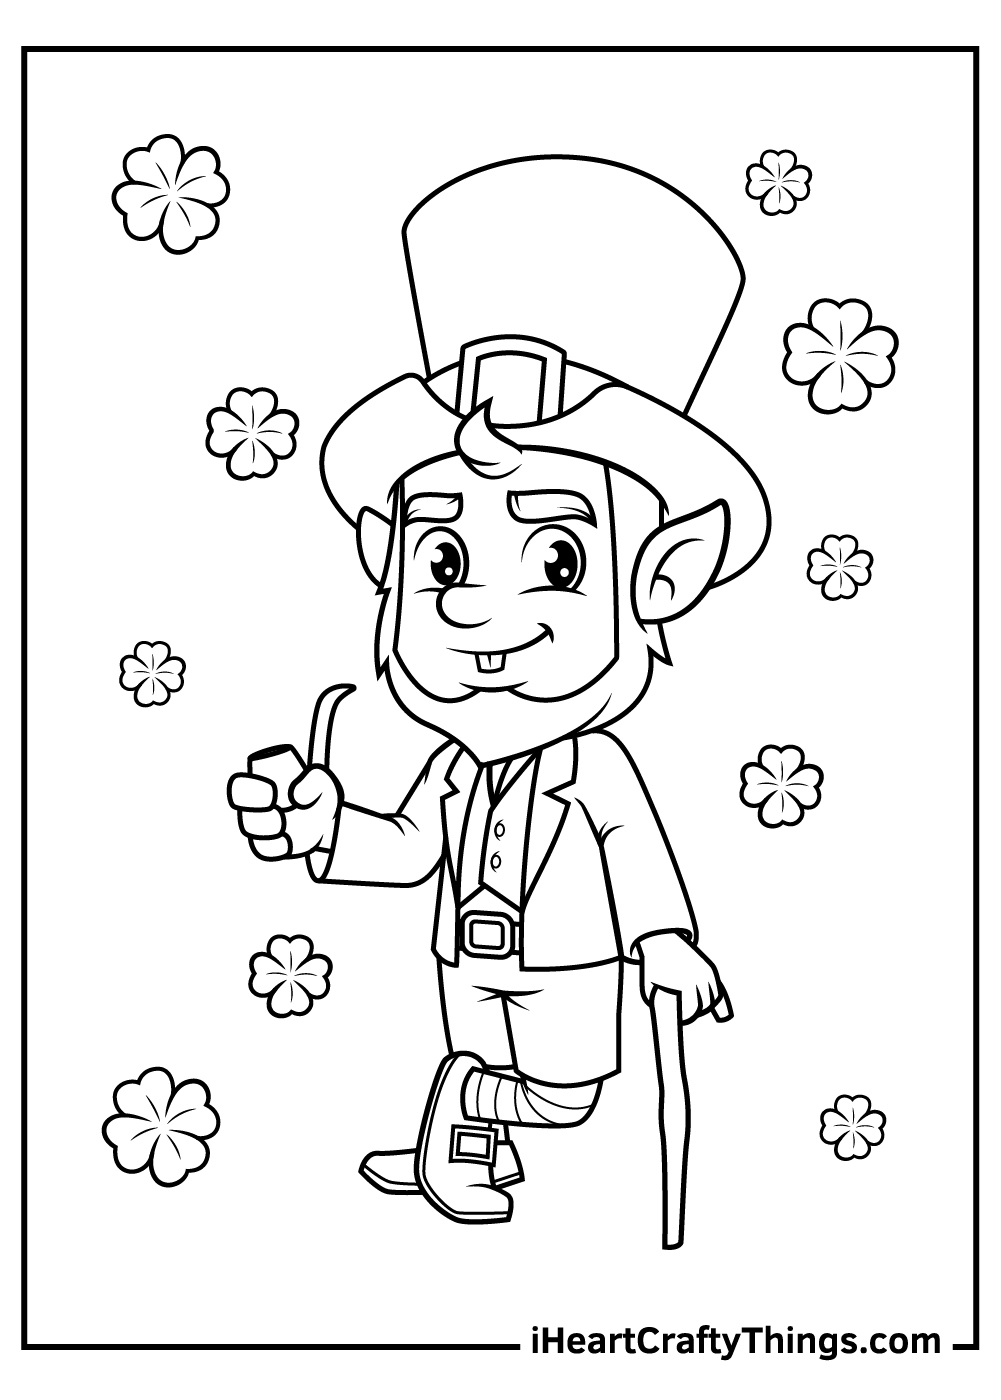 Leprechaun Coloring Pages Updated 20